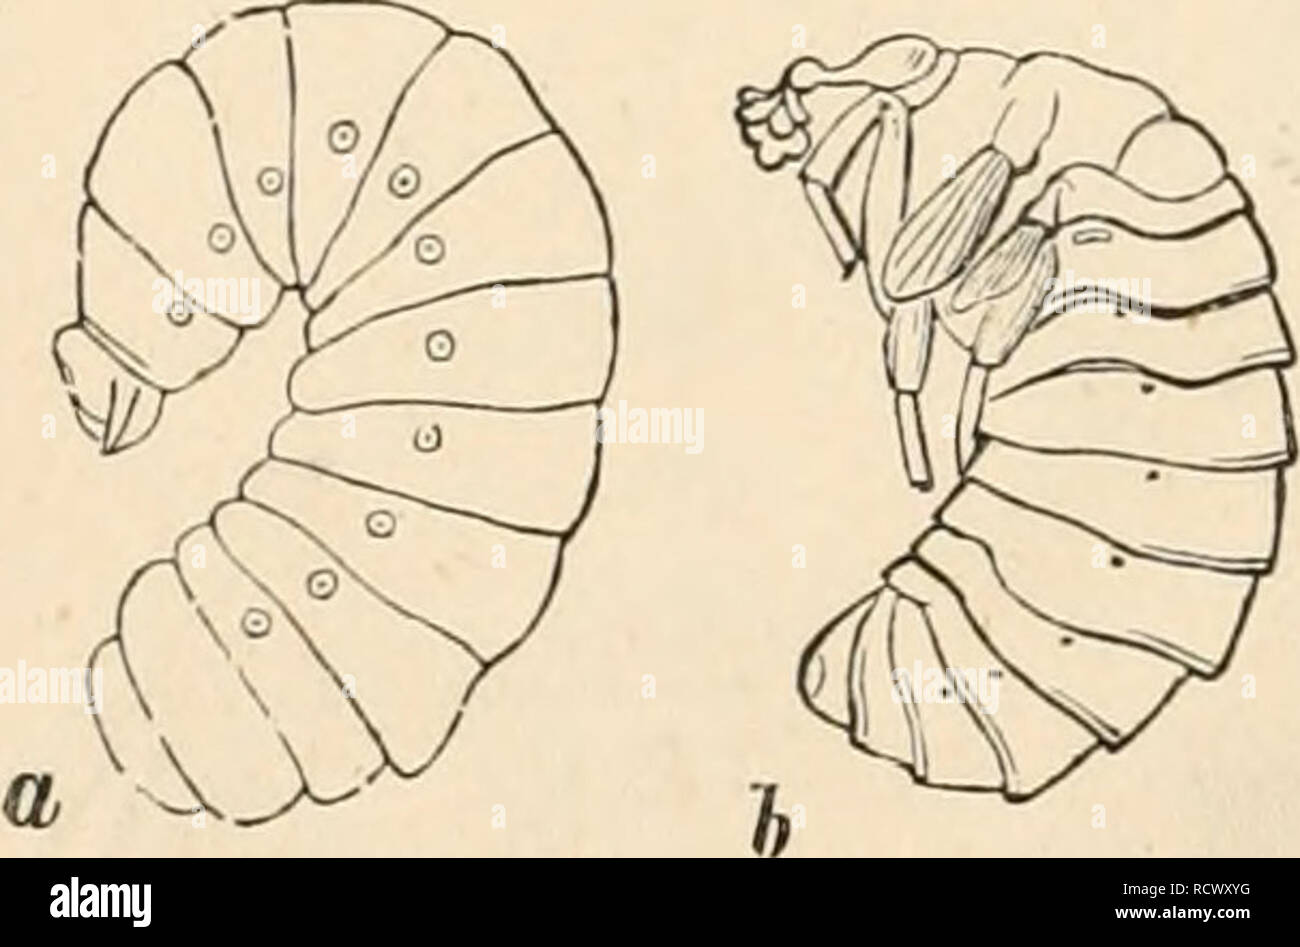 . Elementary text-book of zoology. Zoology. 594 INSECTA. Bub-order 1.—Terebrantia. Female with ovipositor as tube or borer (terebra), which projects freely at the end of the abdomen, and is sometimes retractile. Tribe 1. Phytophaga. Abdomen sessile. Trochanter composed of two rings. Larvae phytophagous, resemble caterpillars. Fam. Tenthredinidae (Leaf-wasps). Saw-flies. Abdomen sessile with short borer. The larvie have rarely three, usually nine to eleven pairs of legs, and resemble caterpillars. The females lay their eggs in the epidermis of leaves, the puncture causes the flow of .sap. which Stock Photo